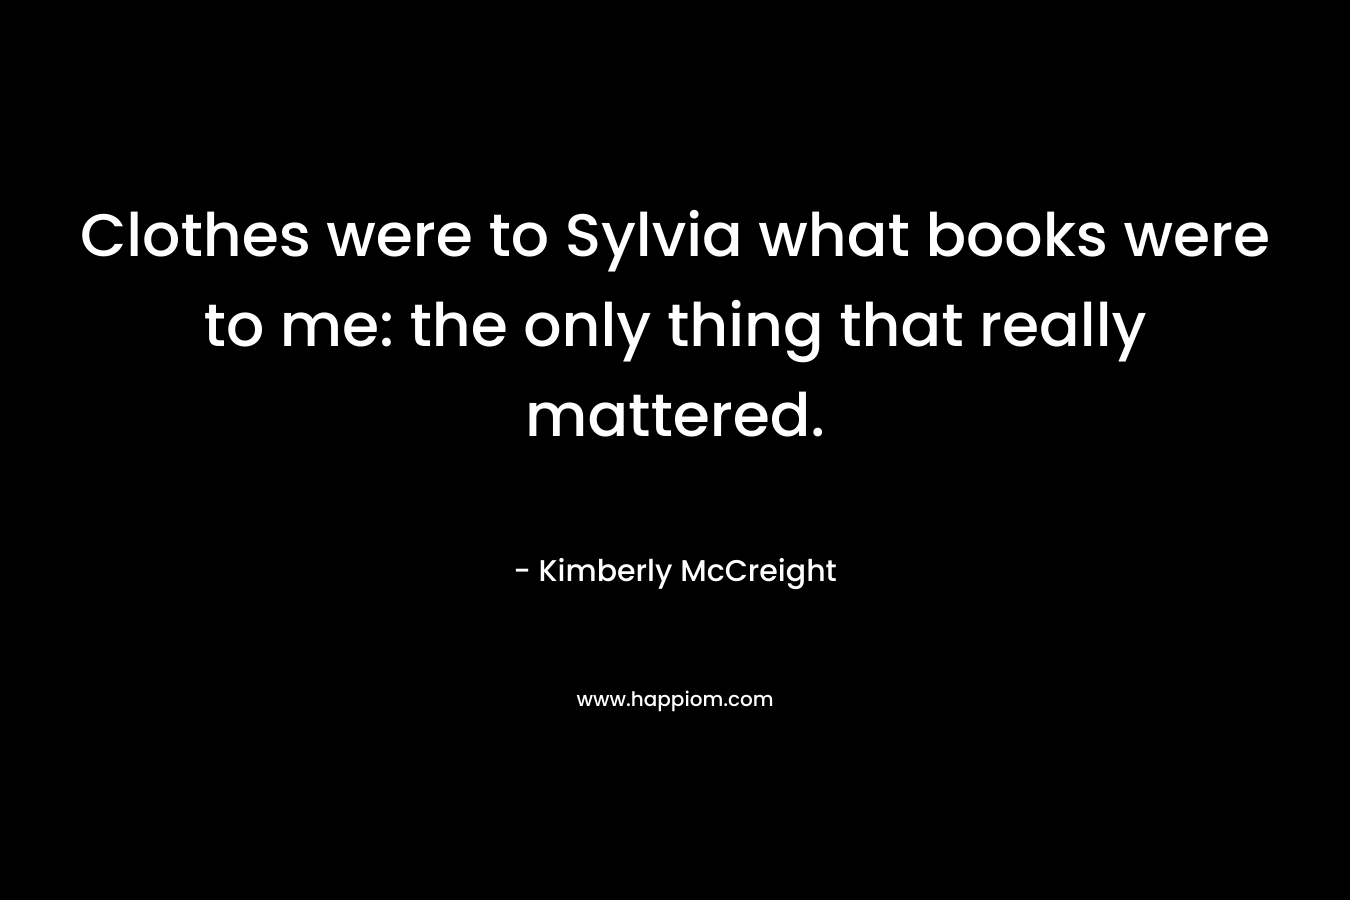 Clothes were to Sylvia what books were to me: the only thing that really mattered.